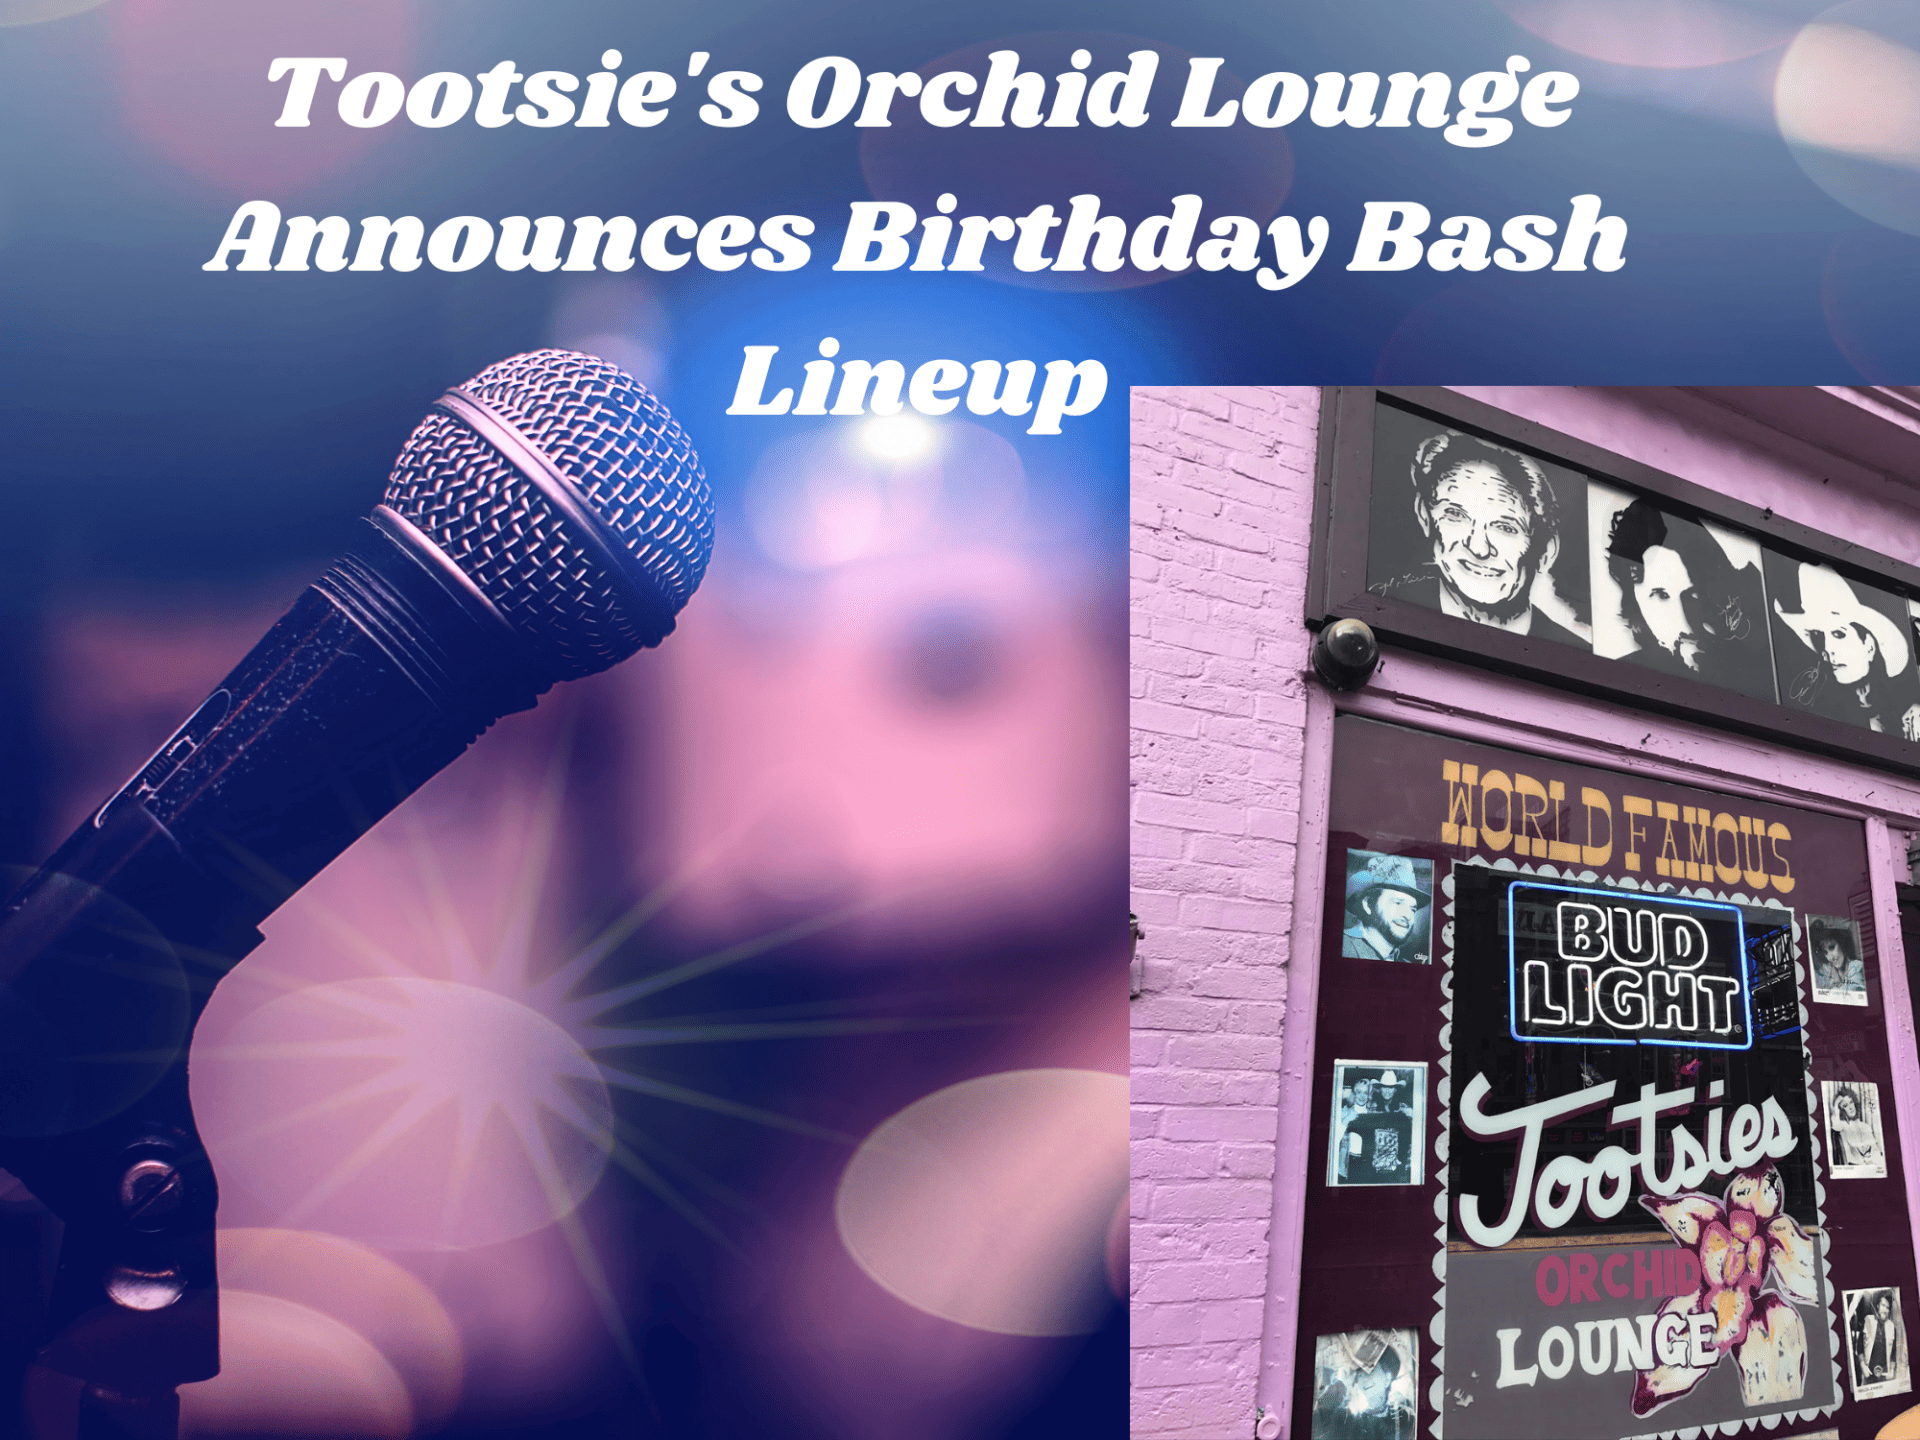 World Famous Tootsie's Orchid Lounge Announces Birthday Bash Lineup